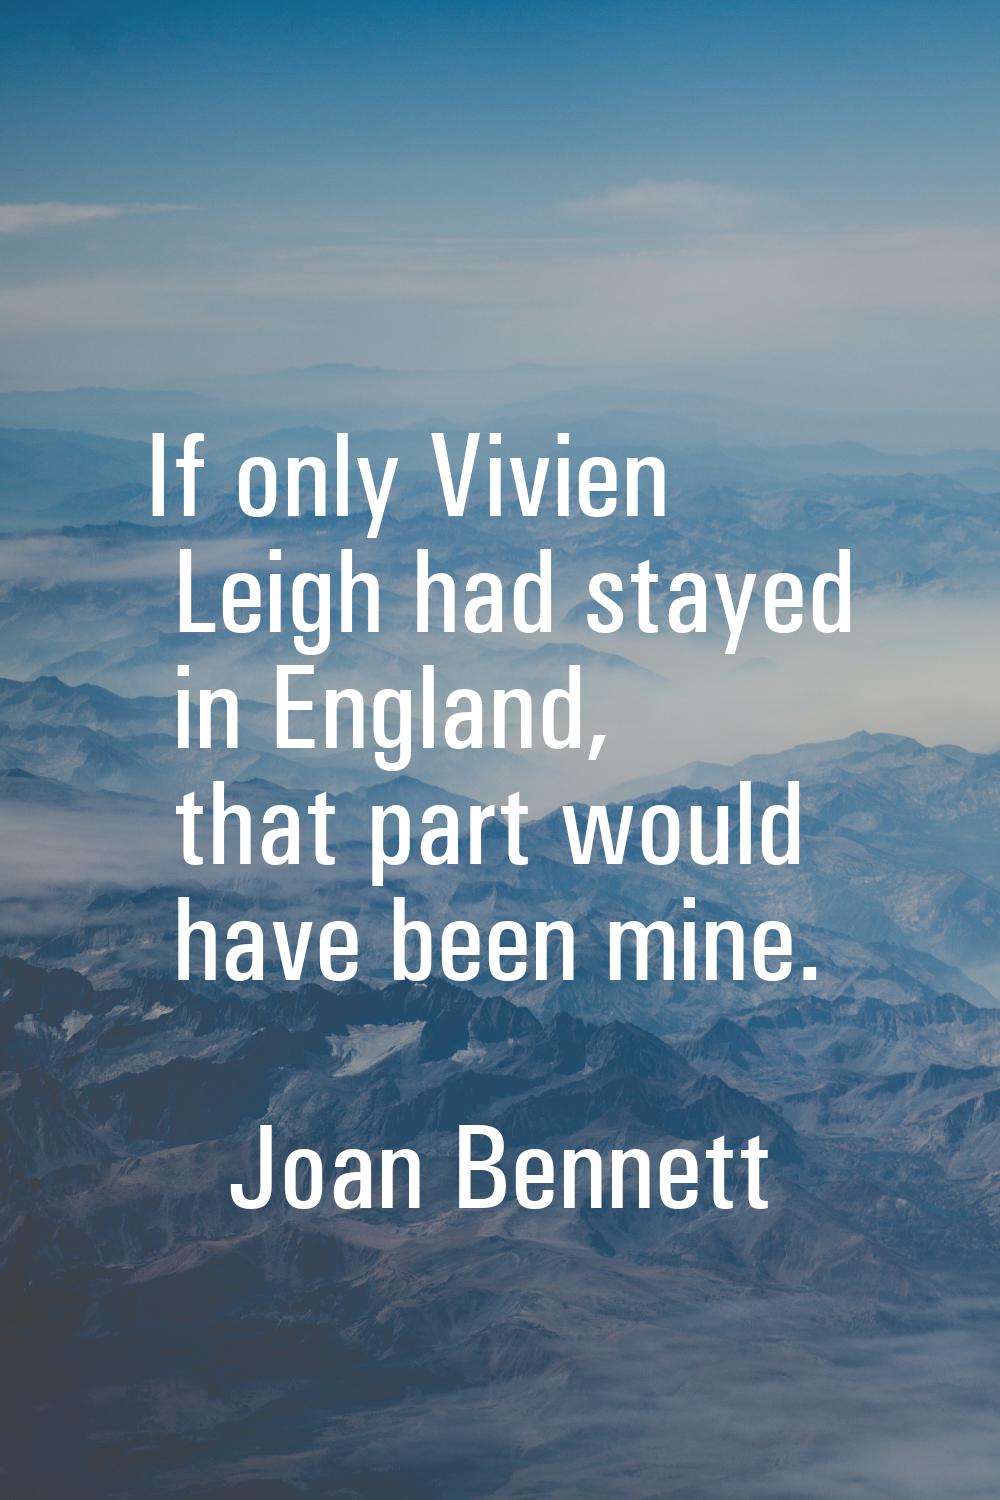 If only Vivien Leigh had stayed in England, that part would have been mine.